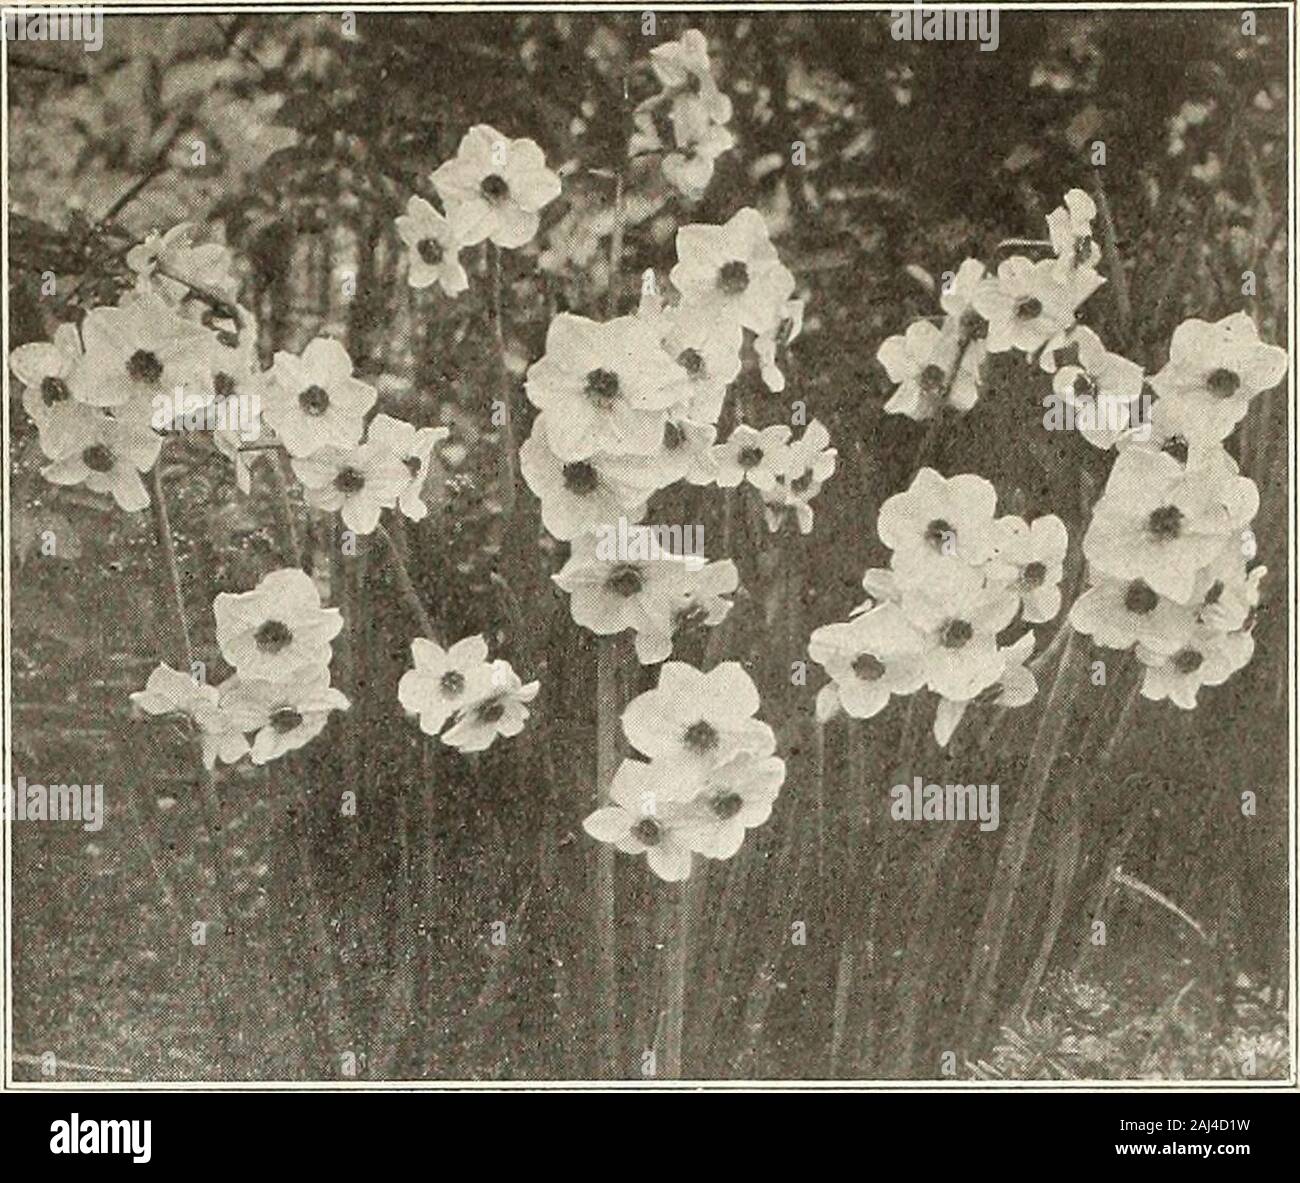 Currie's bulbs and plants : autumn 1913 . ch golden yellow,the finest of all double yellow Daffodils, used exten-sively for forcing as well as for bedding outdoors. Each Doz Extra selected large bulbs $ .04 .35 Mammoth double nosed bulbs that produce two or more flowers 05 .40 100 1000 2.50 10.00 3.00 25.00 Albus Plenus Odoratus—Pure white,sweet scented, resembles a Gar-denia 03 Incomparable (Butter and Eggs) — Sulphur yellow, sweet scented. .04Orange Phoenix—White and orange .04Fine Mixed Double Sorts 03 20 1.50 .35 2.00 12.(10.35 2.00 12.00.30 1.75 12.00 Polyanthus Narcissus The Polyanthus v Stock Photo